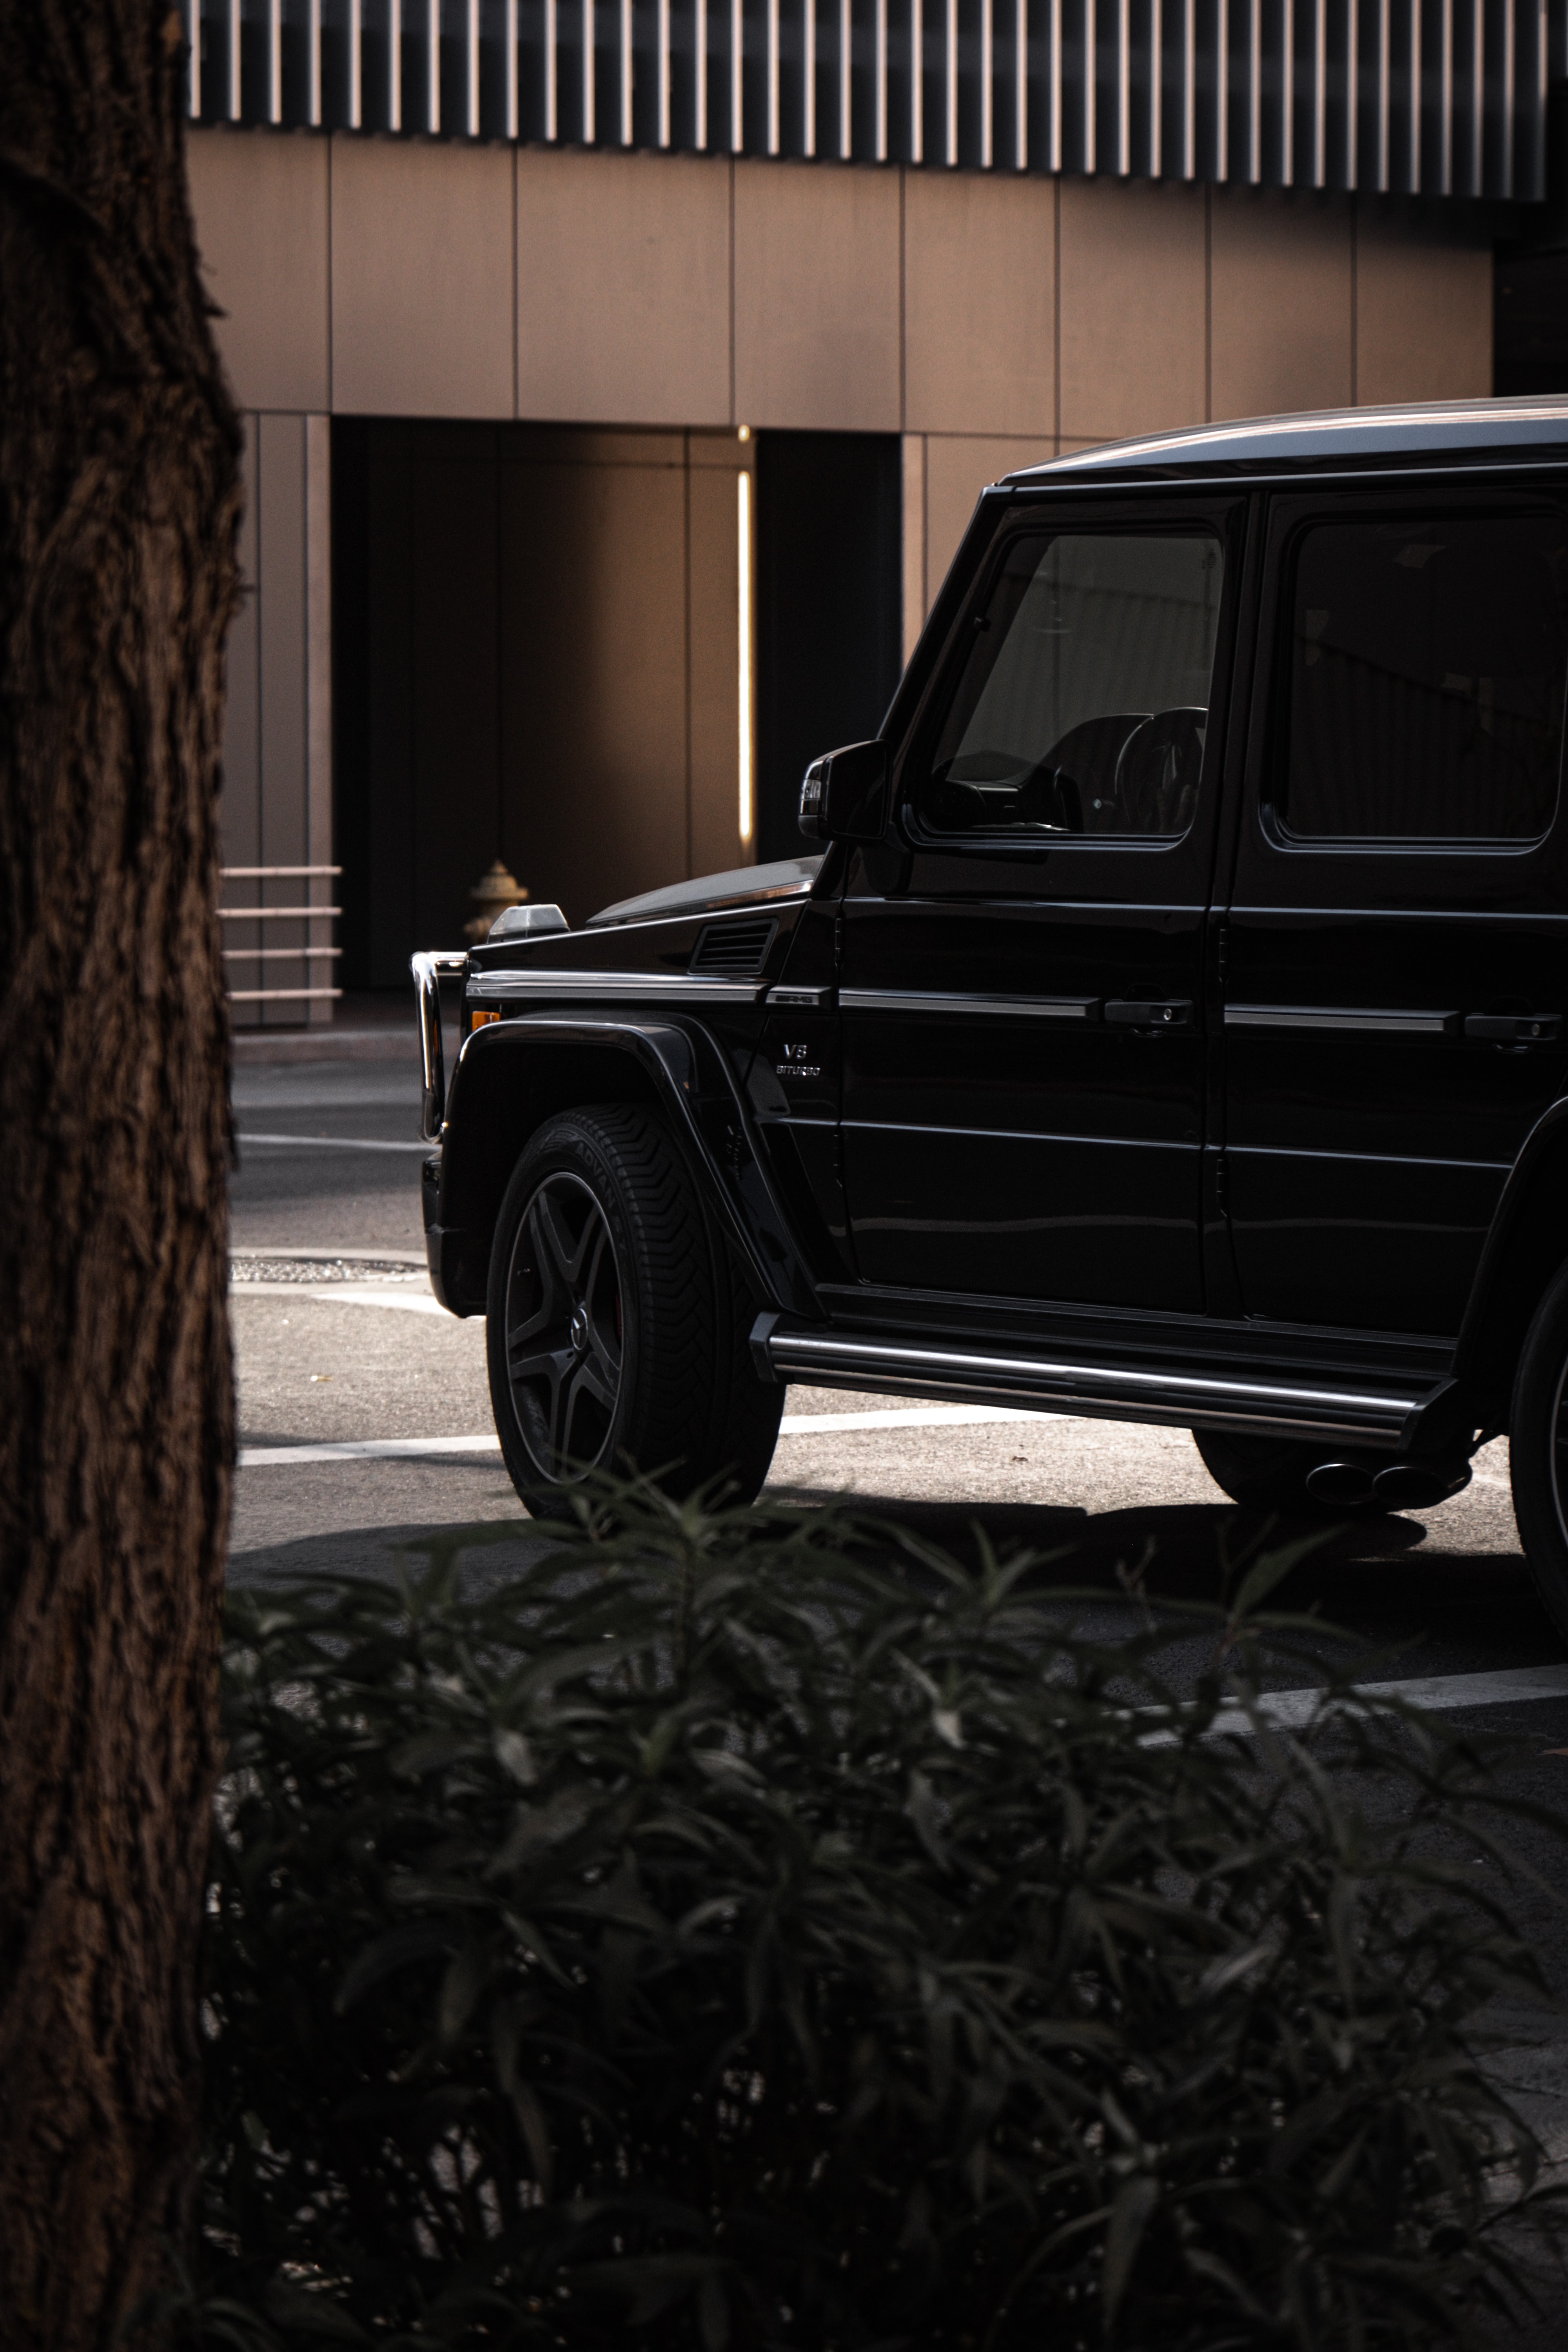 suv, mercedes, cars, black, car, side view iphone wallpaper